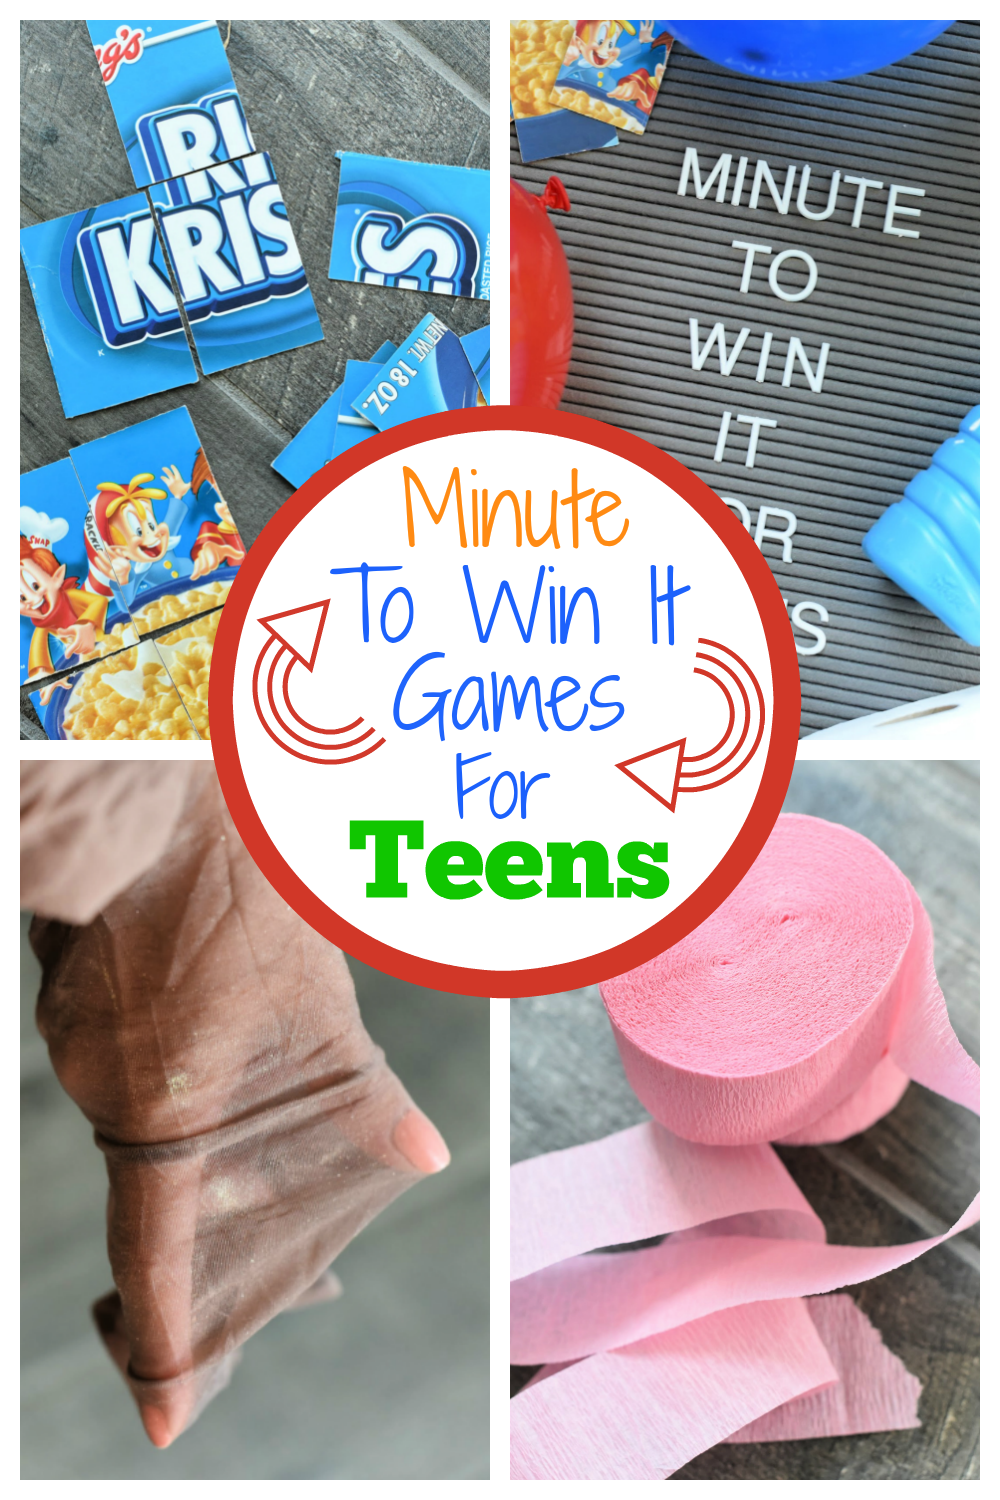 Minute to Win it Games for Teens. Fun party games for teens for your next party! #minutetowinit #teenparty #partygames #teenpartygames